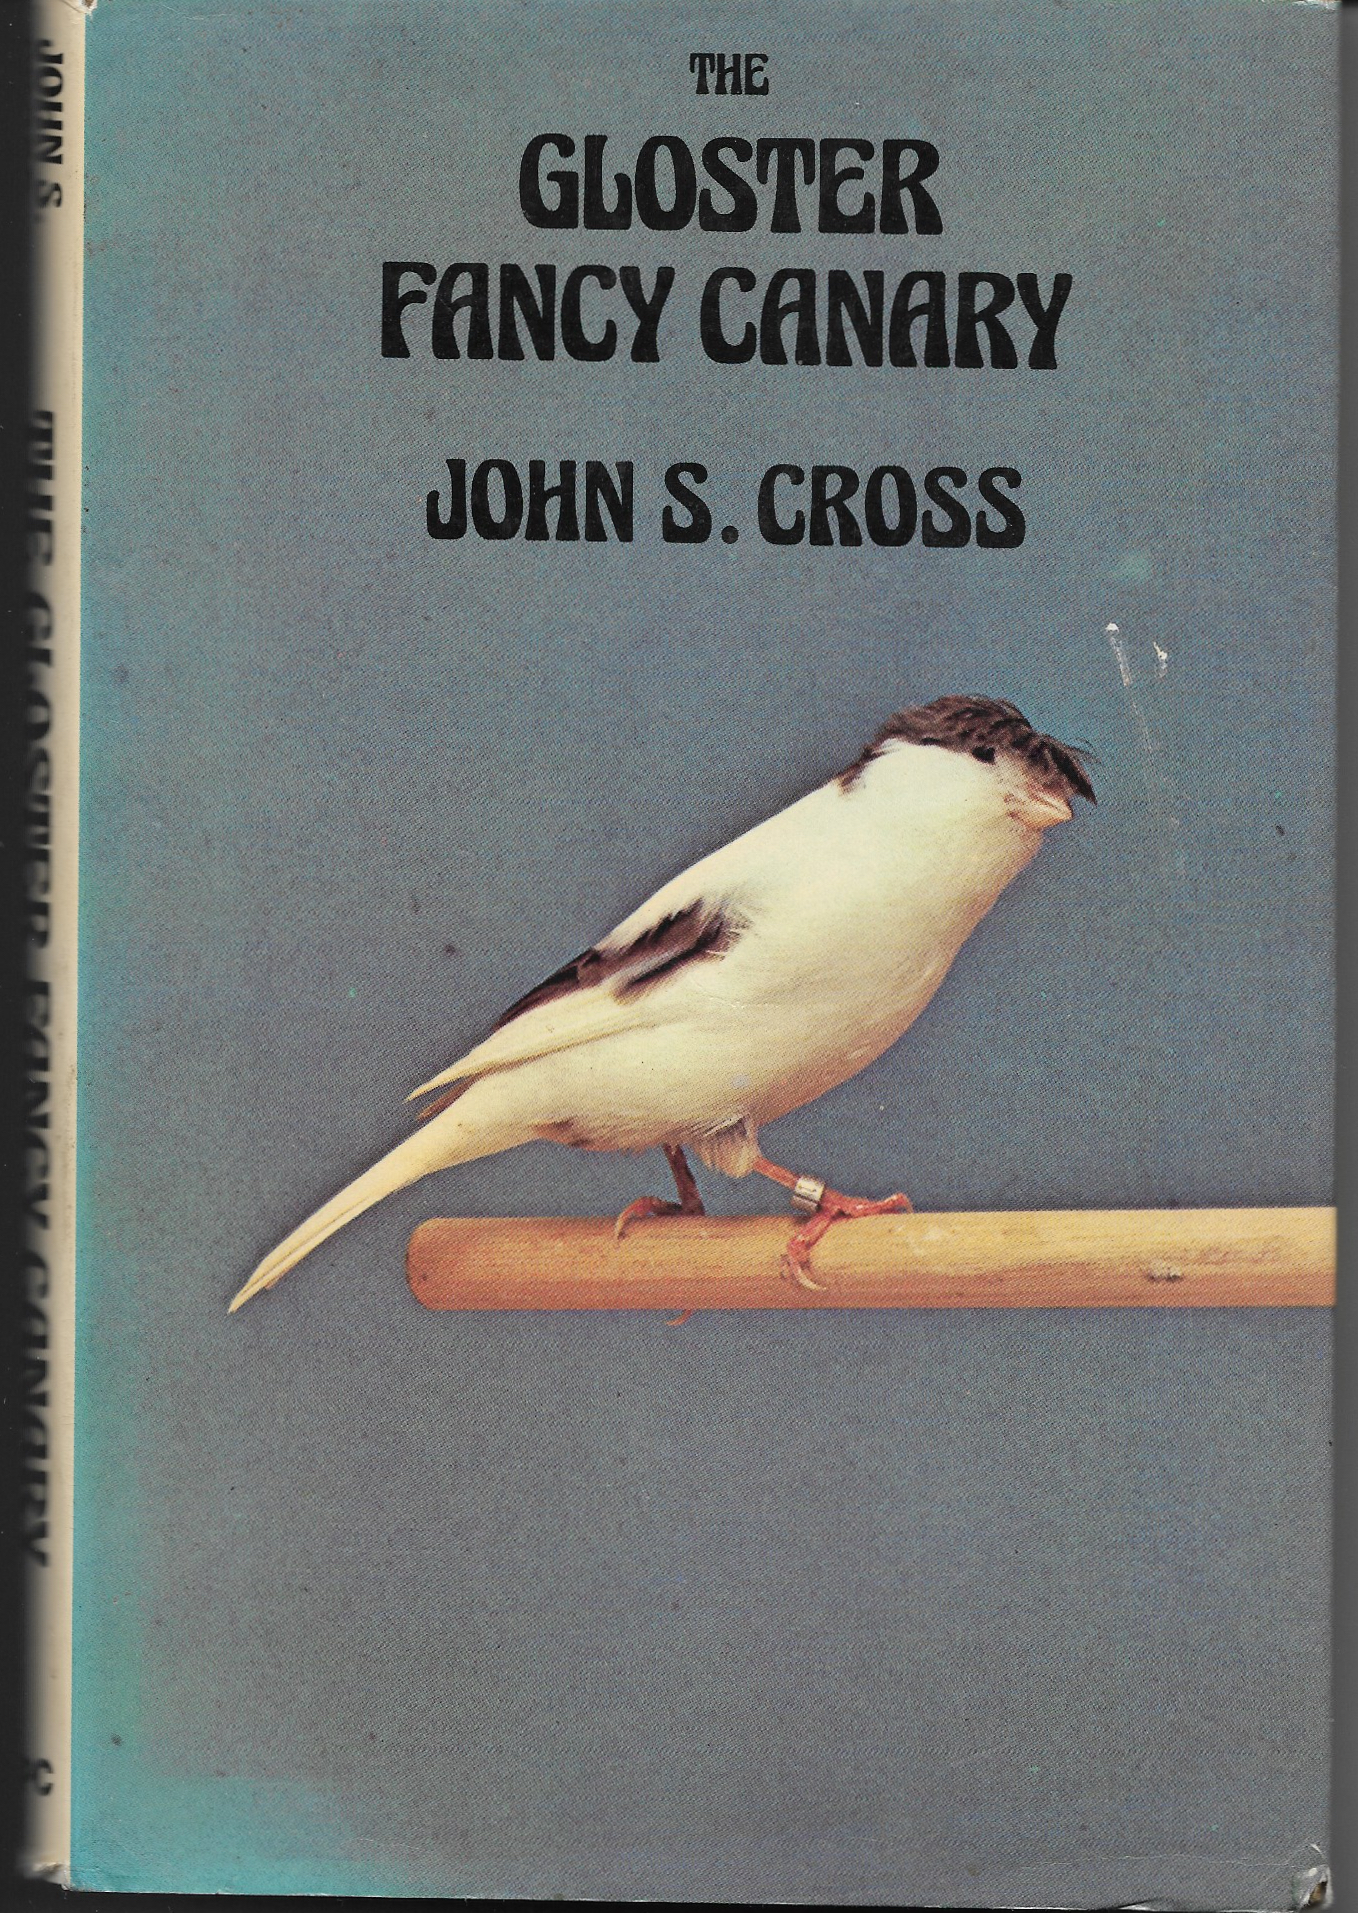 THE GLOSTER FANCY CANARY